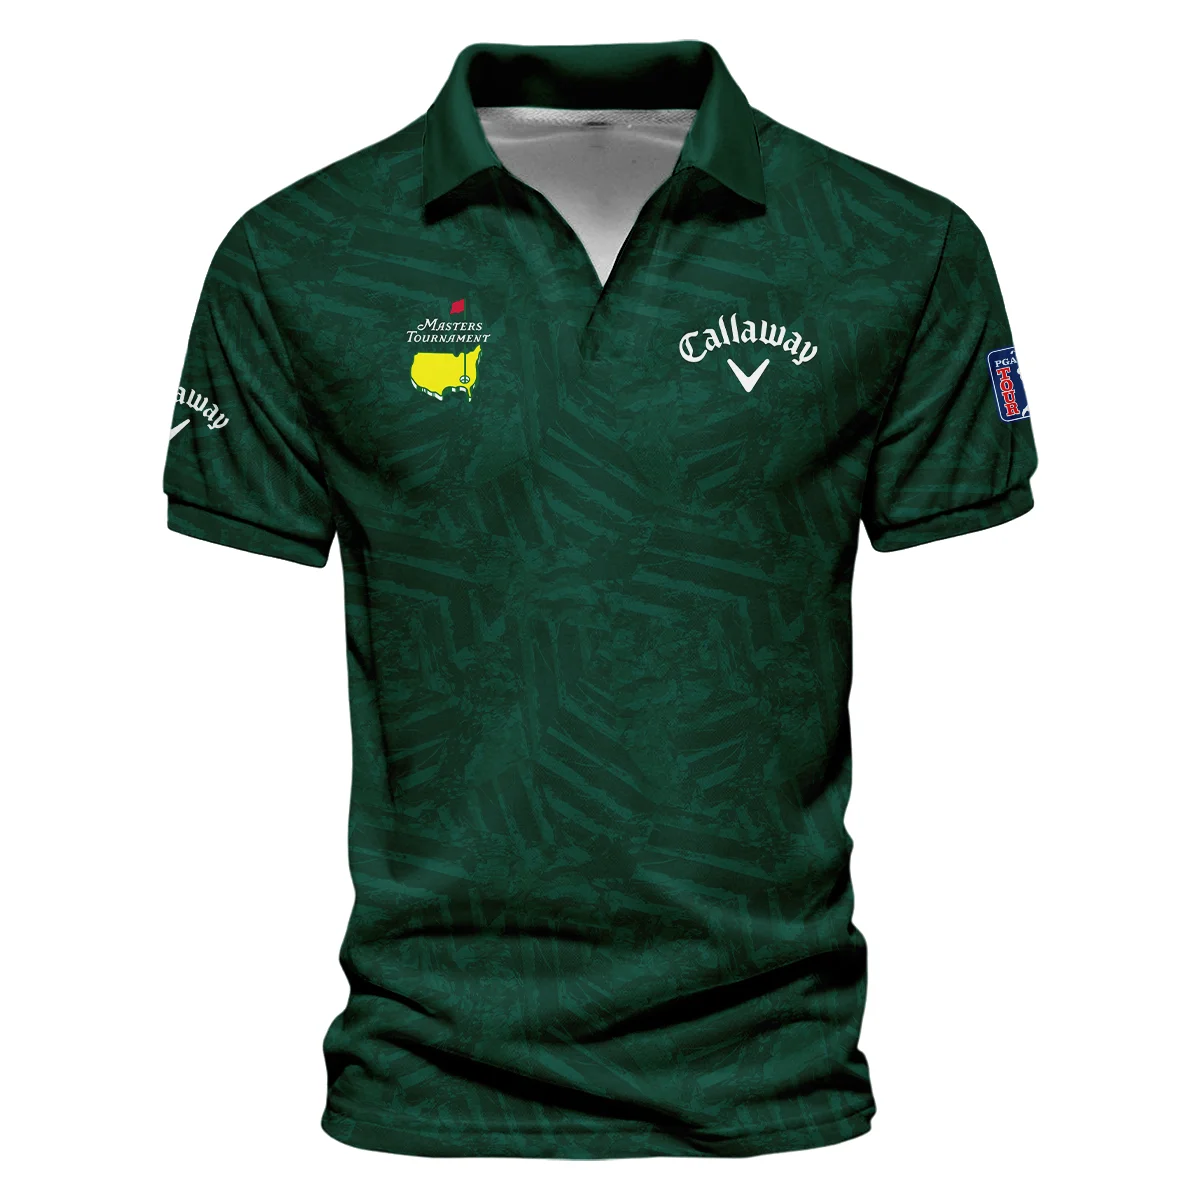 Callaway Masters Tournament Green Stratches Seamless Pattern Vneck Polo Shirt Style Classic Polo Shirt For Men